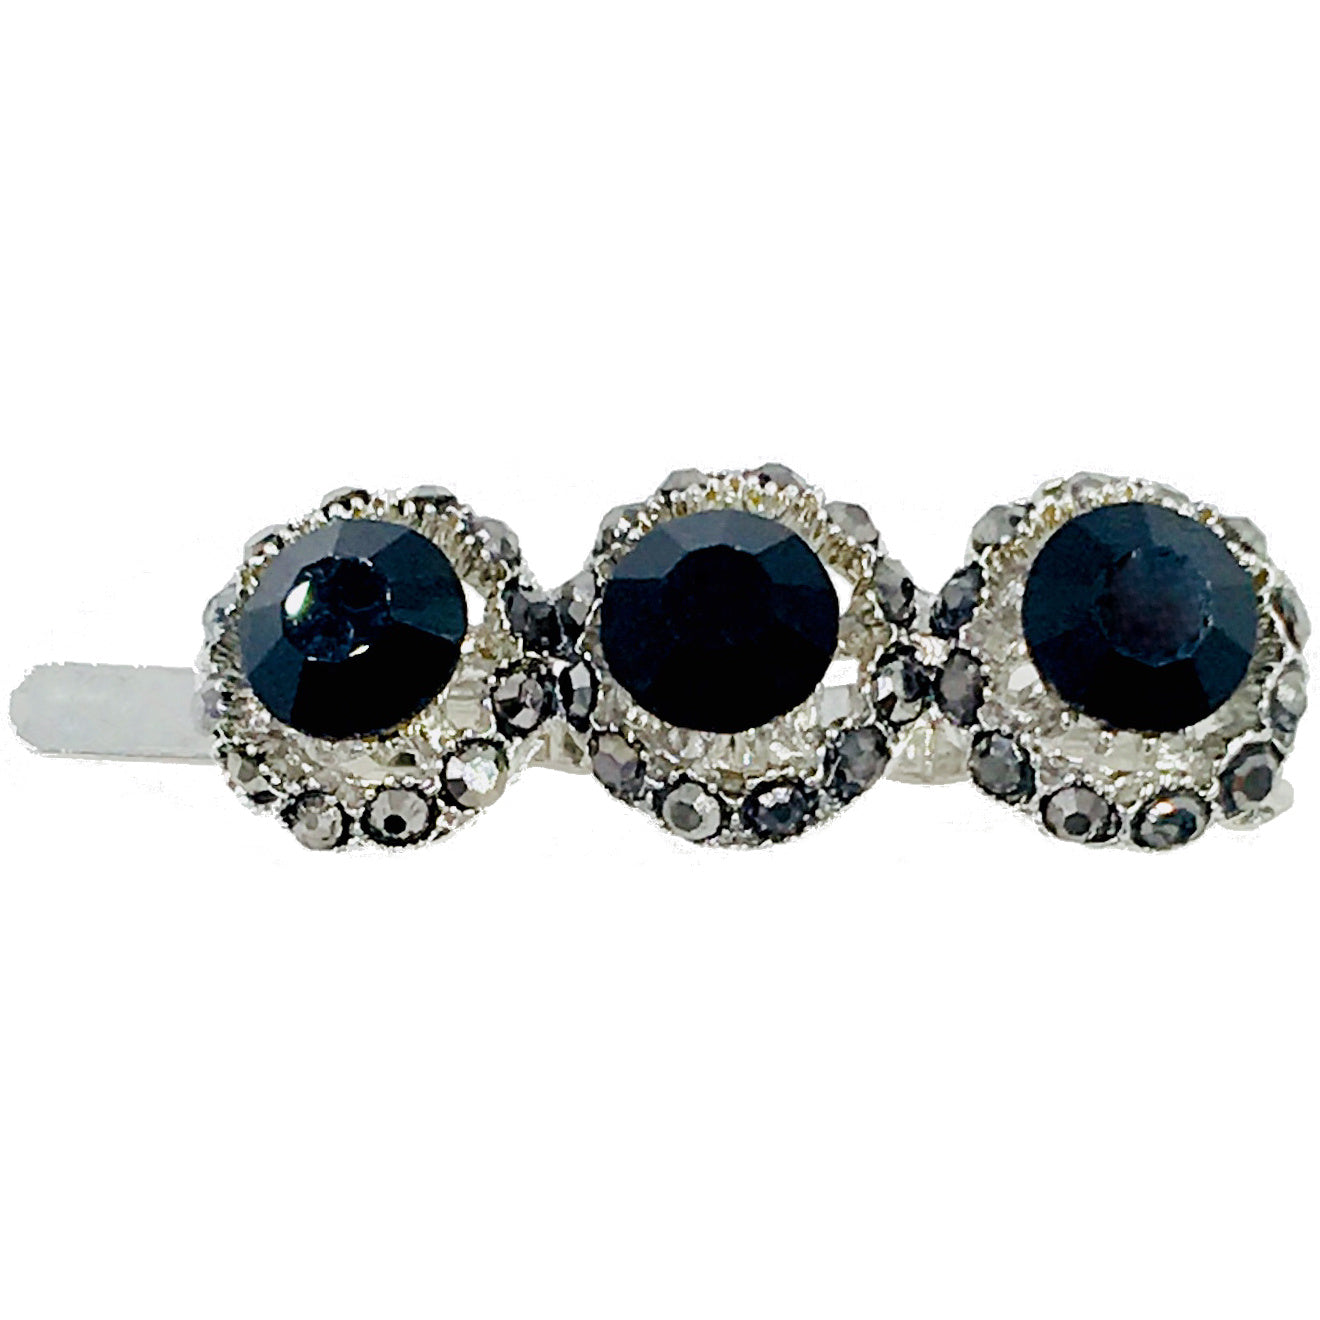 Sunflower Trio Magnetic Hair Clip use Rhinestone Crystal silver base, Magnetic Clip - MOGHANT